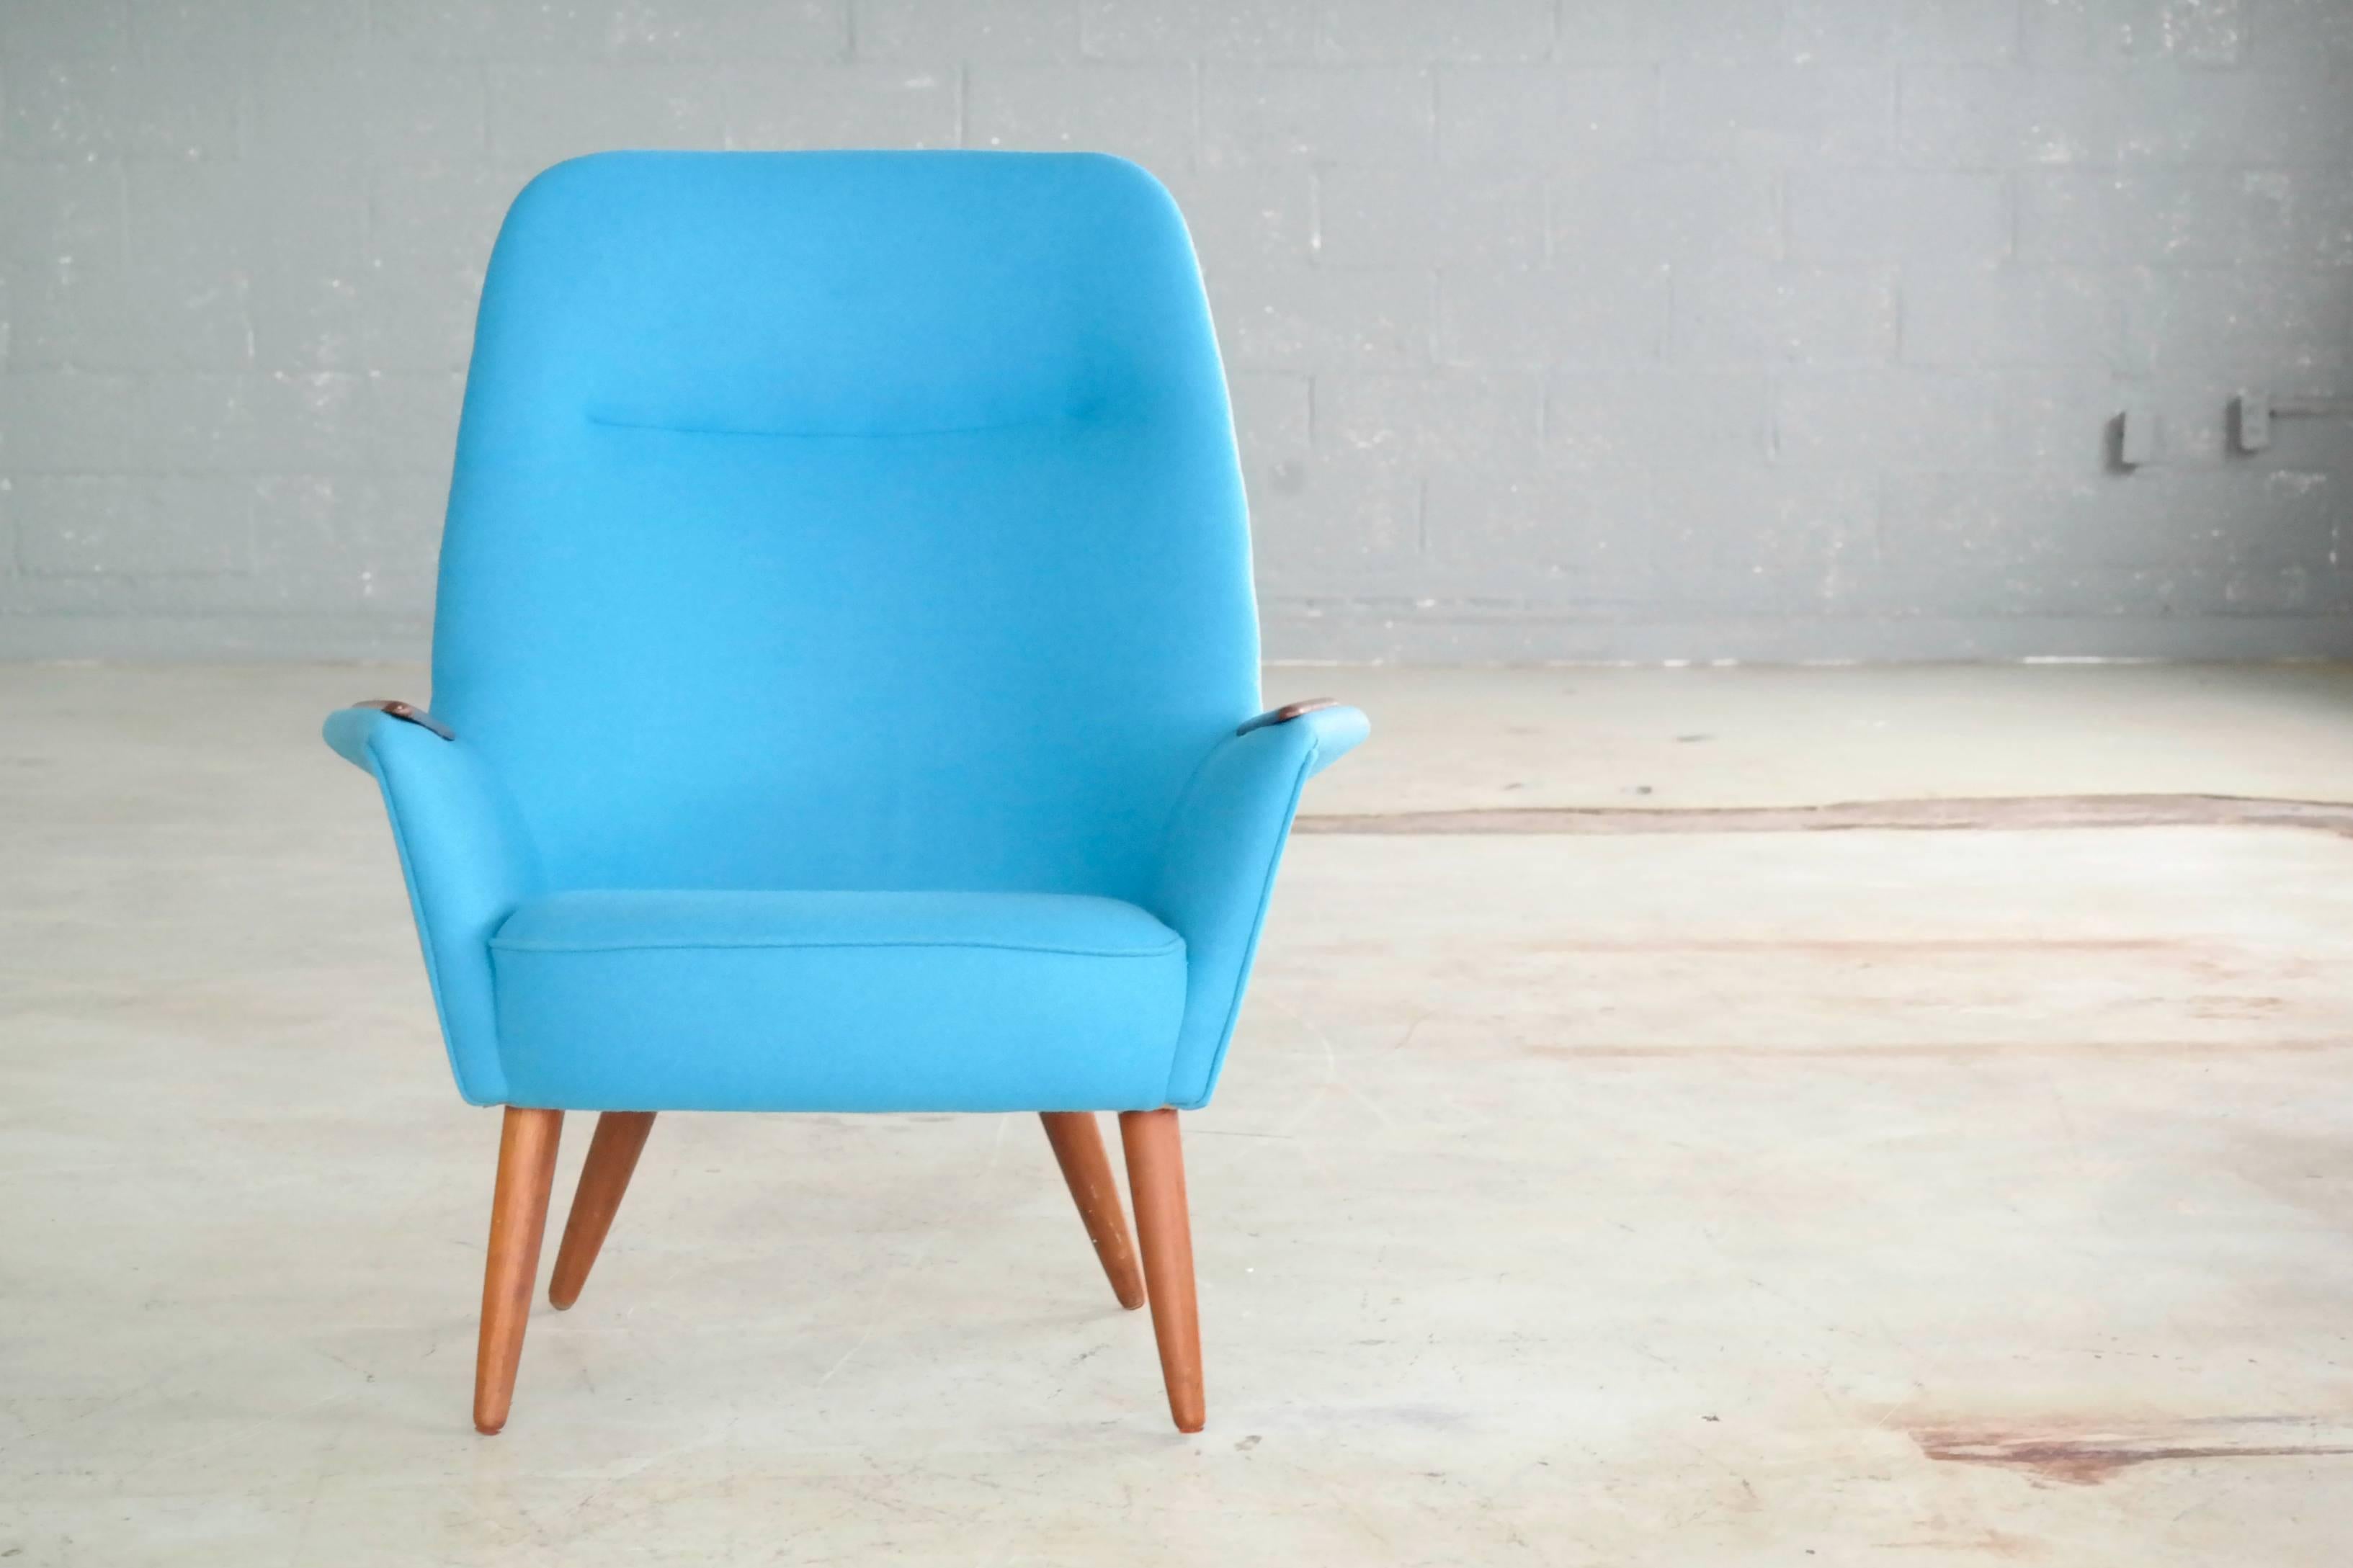 Elegant and very sweet Danish midcentury lounge chair made in the mid-1950s presumably designed by Frode Holm. Fully refurbished and newly re-upholstered in a smooth light blue Divino wool made by Kvadrat of Denmark. Strong statement piece despite